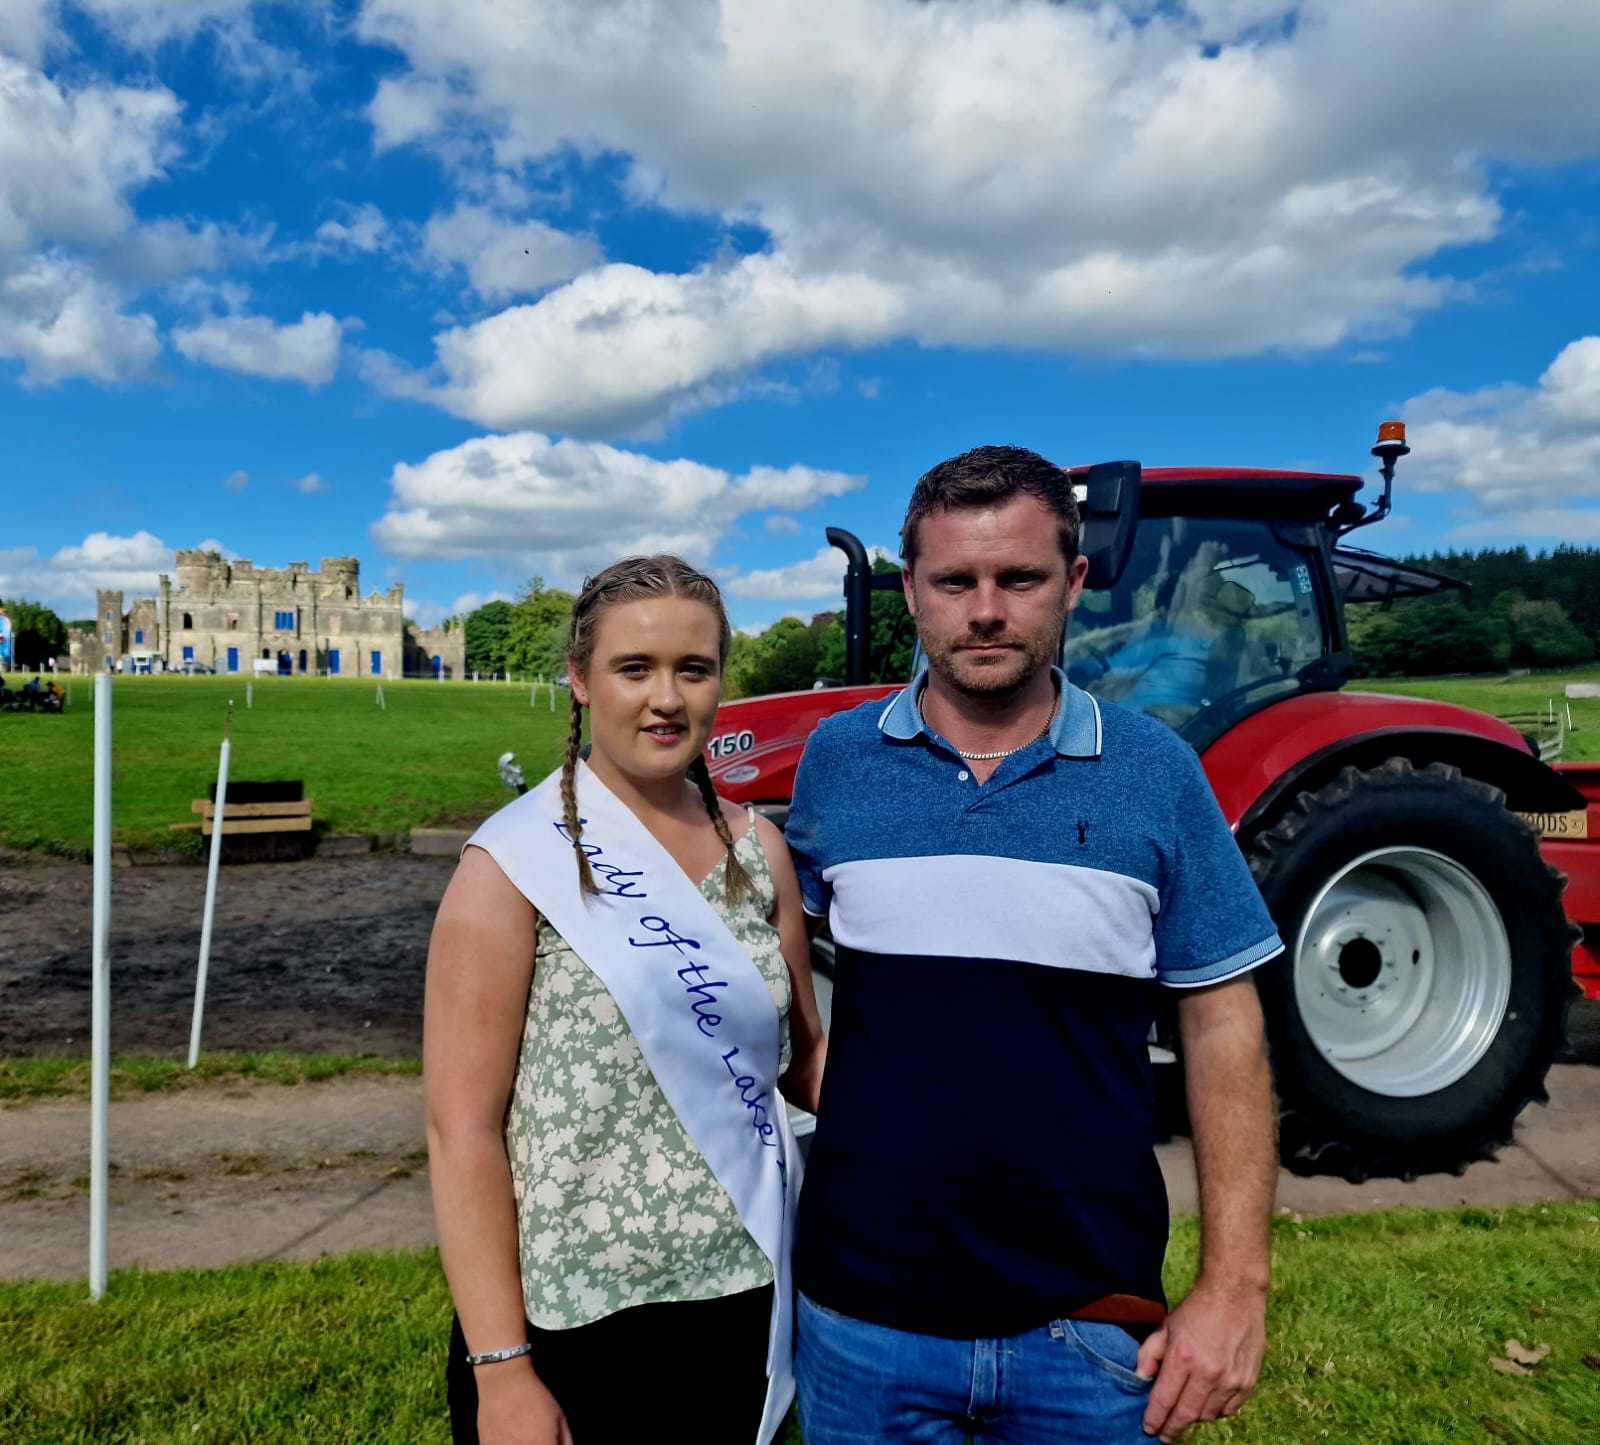 Winner of the tractor and trailer reversing competition Emmett Gillen pictured with Lady of the Lake Chloe McKevlin.